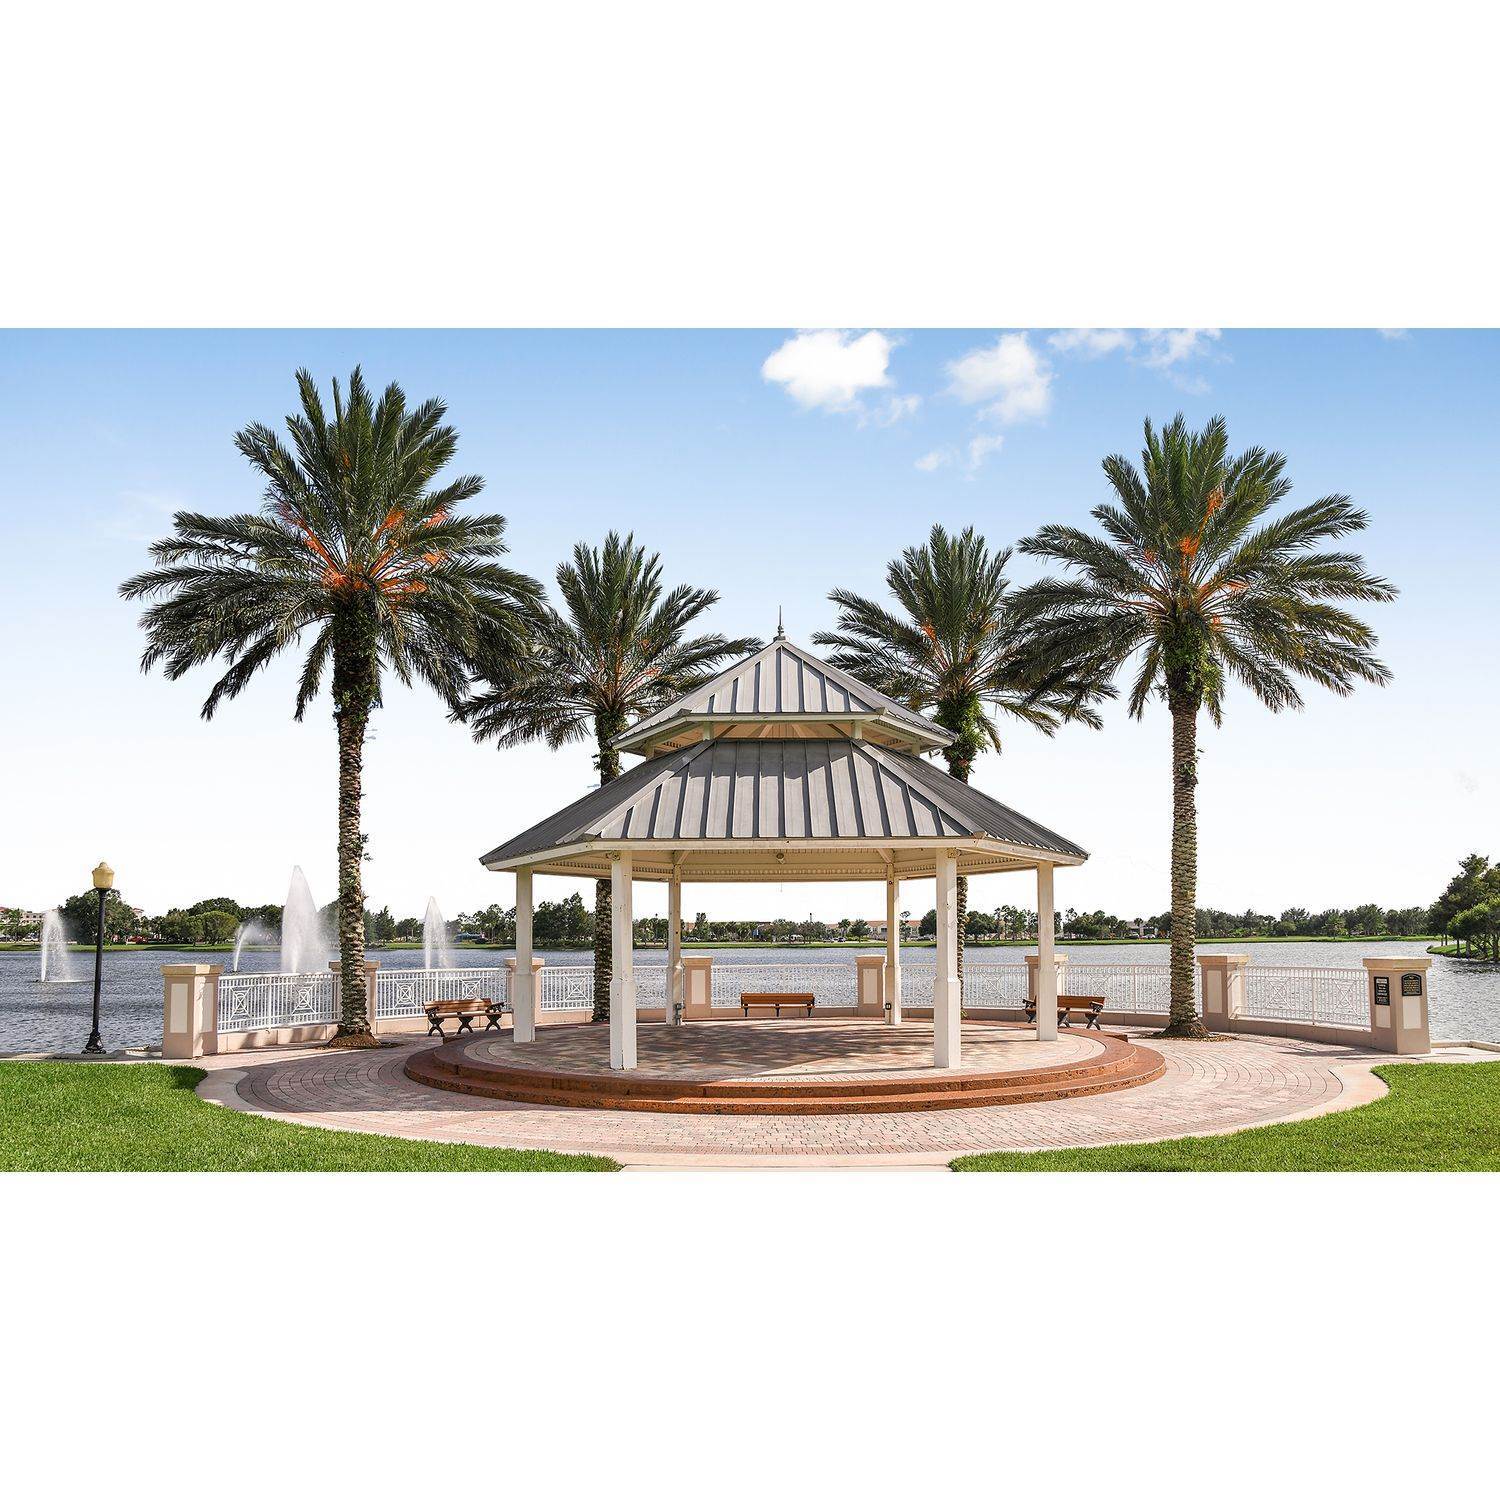 23. Esplanade at Tradition xây dựng tại 12753 SW Barelli Ct, Port St. Lucie, FL 34987